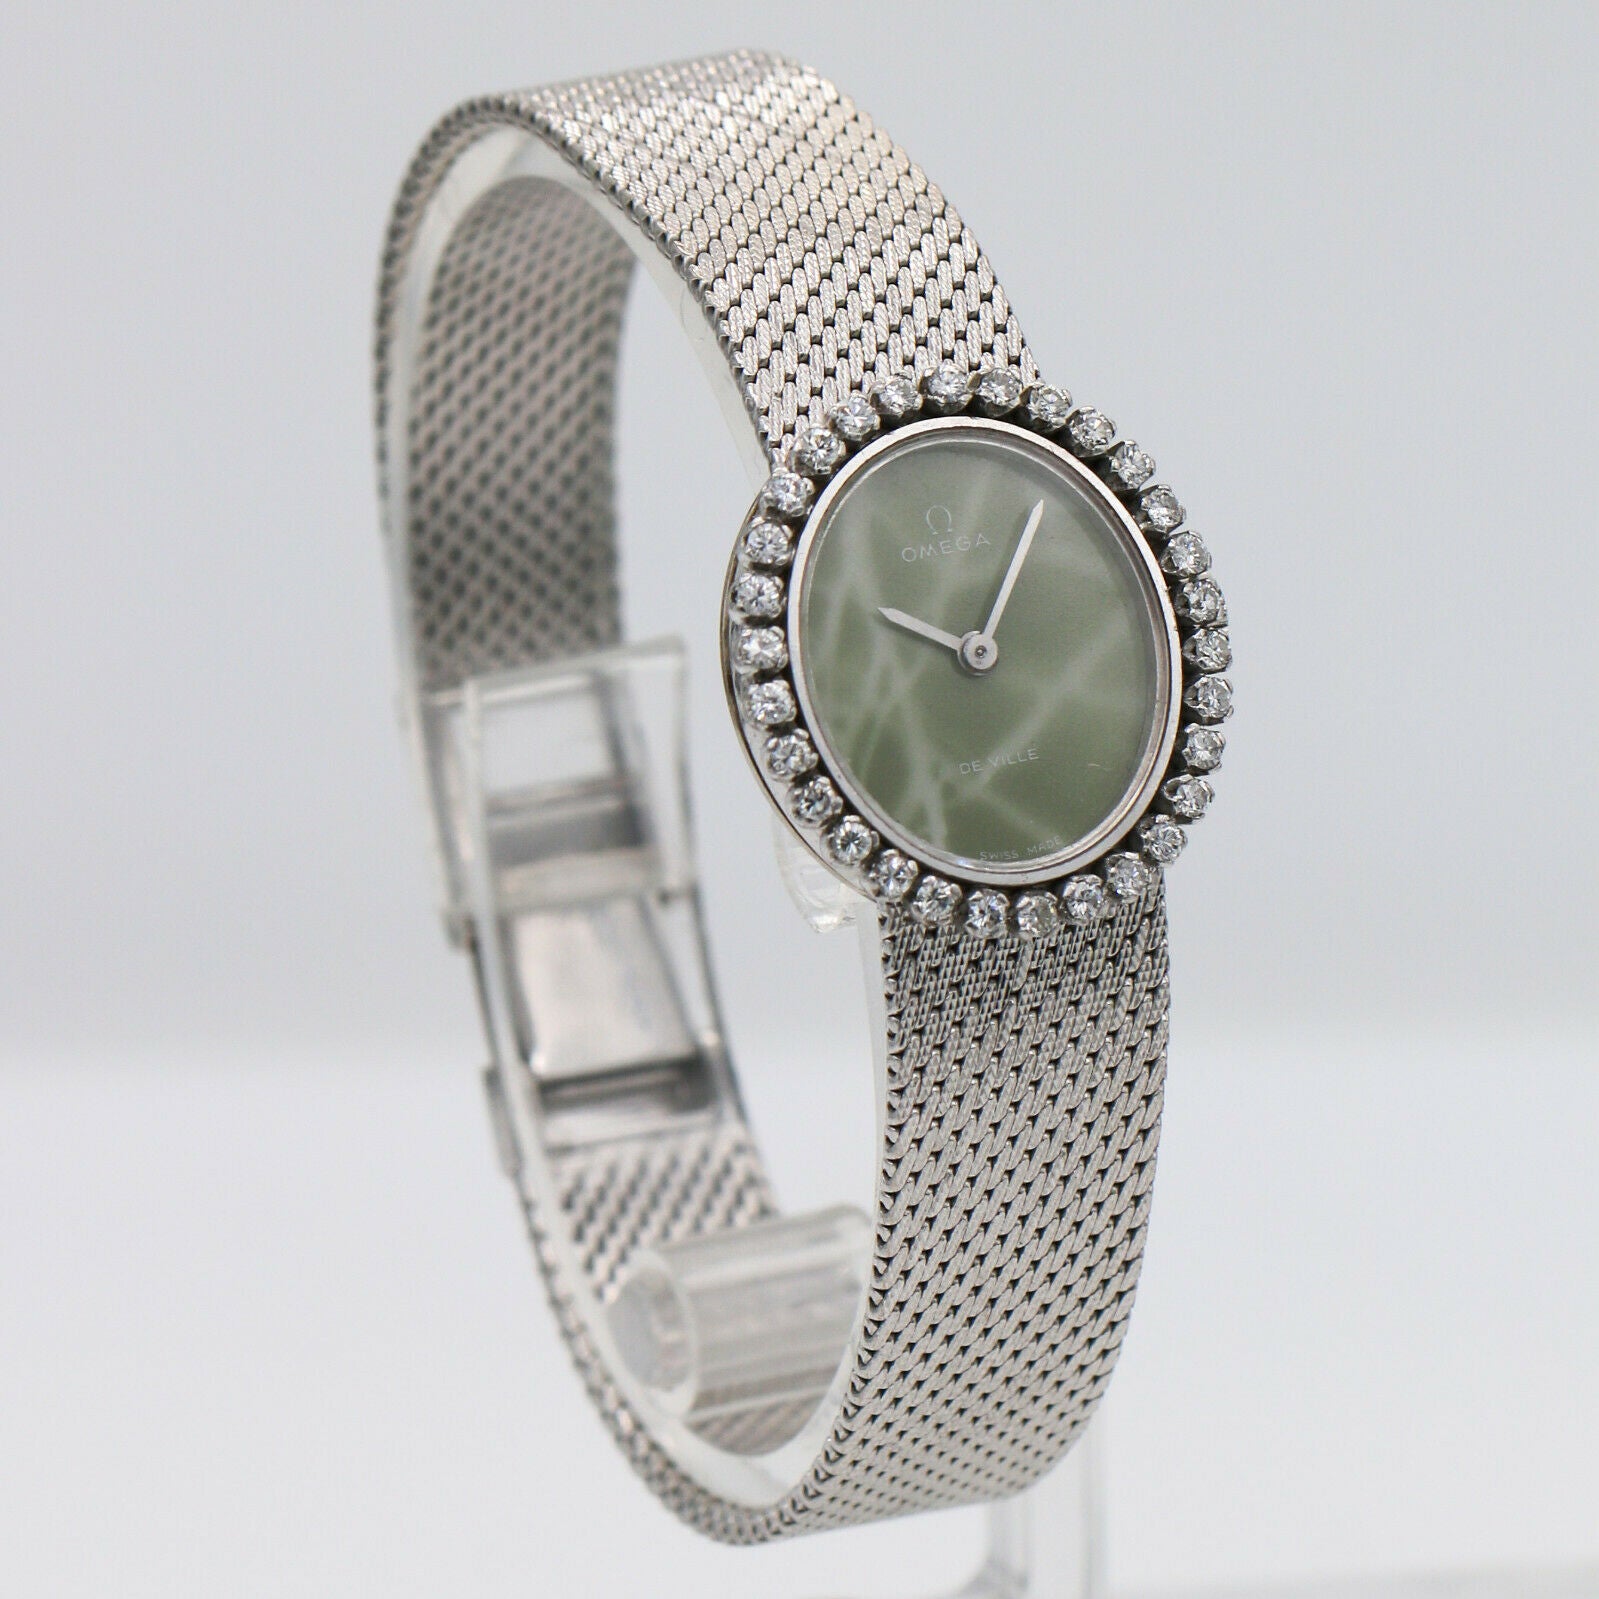 Vintage Ladies Omega 18k White Gold Diamond Watch with Green Marble Dial